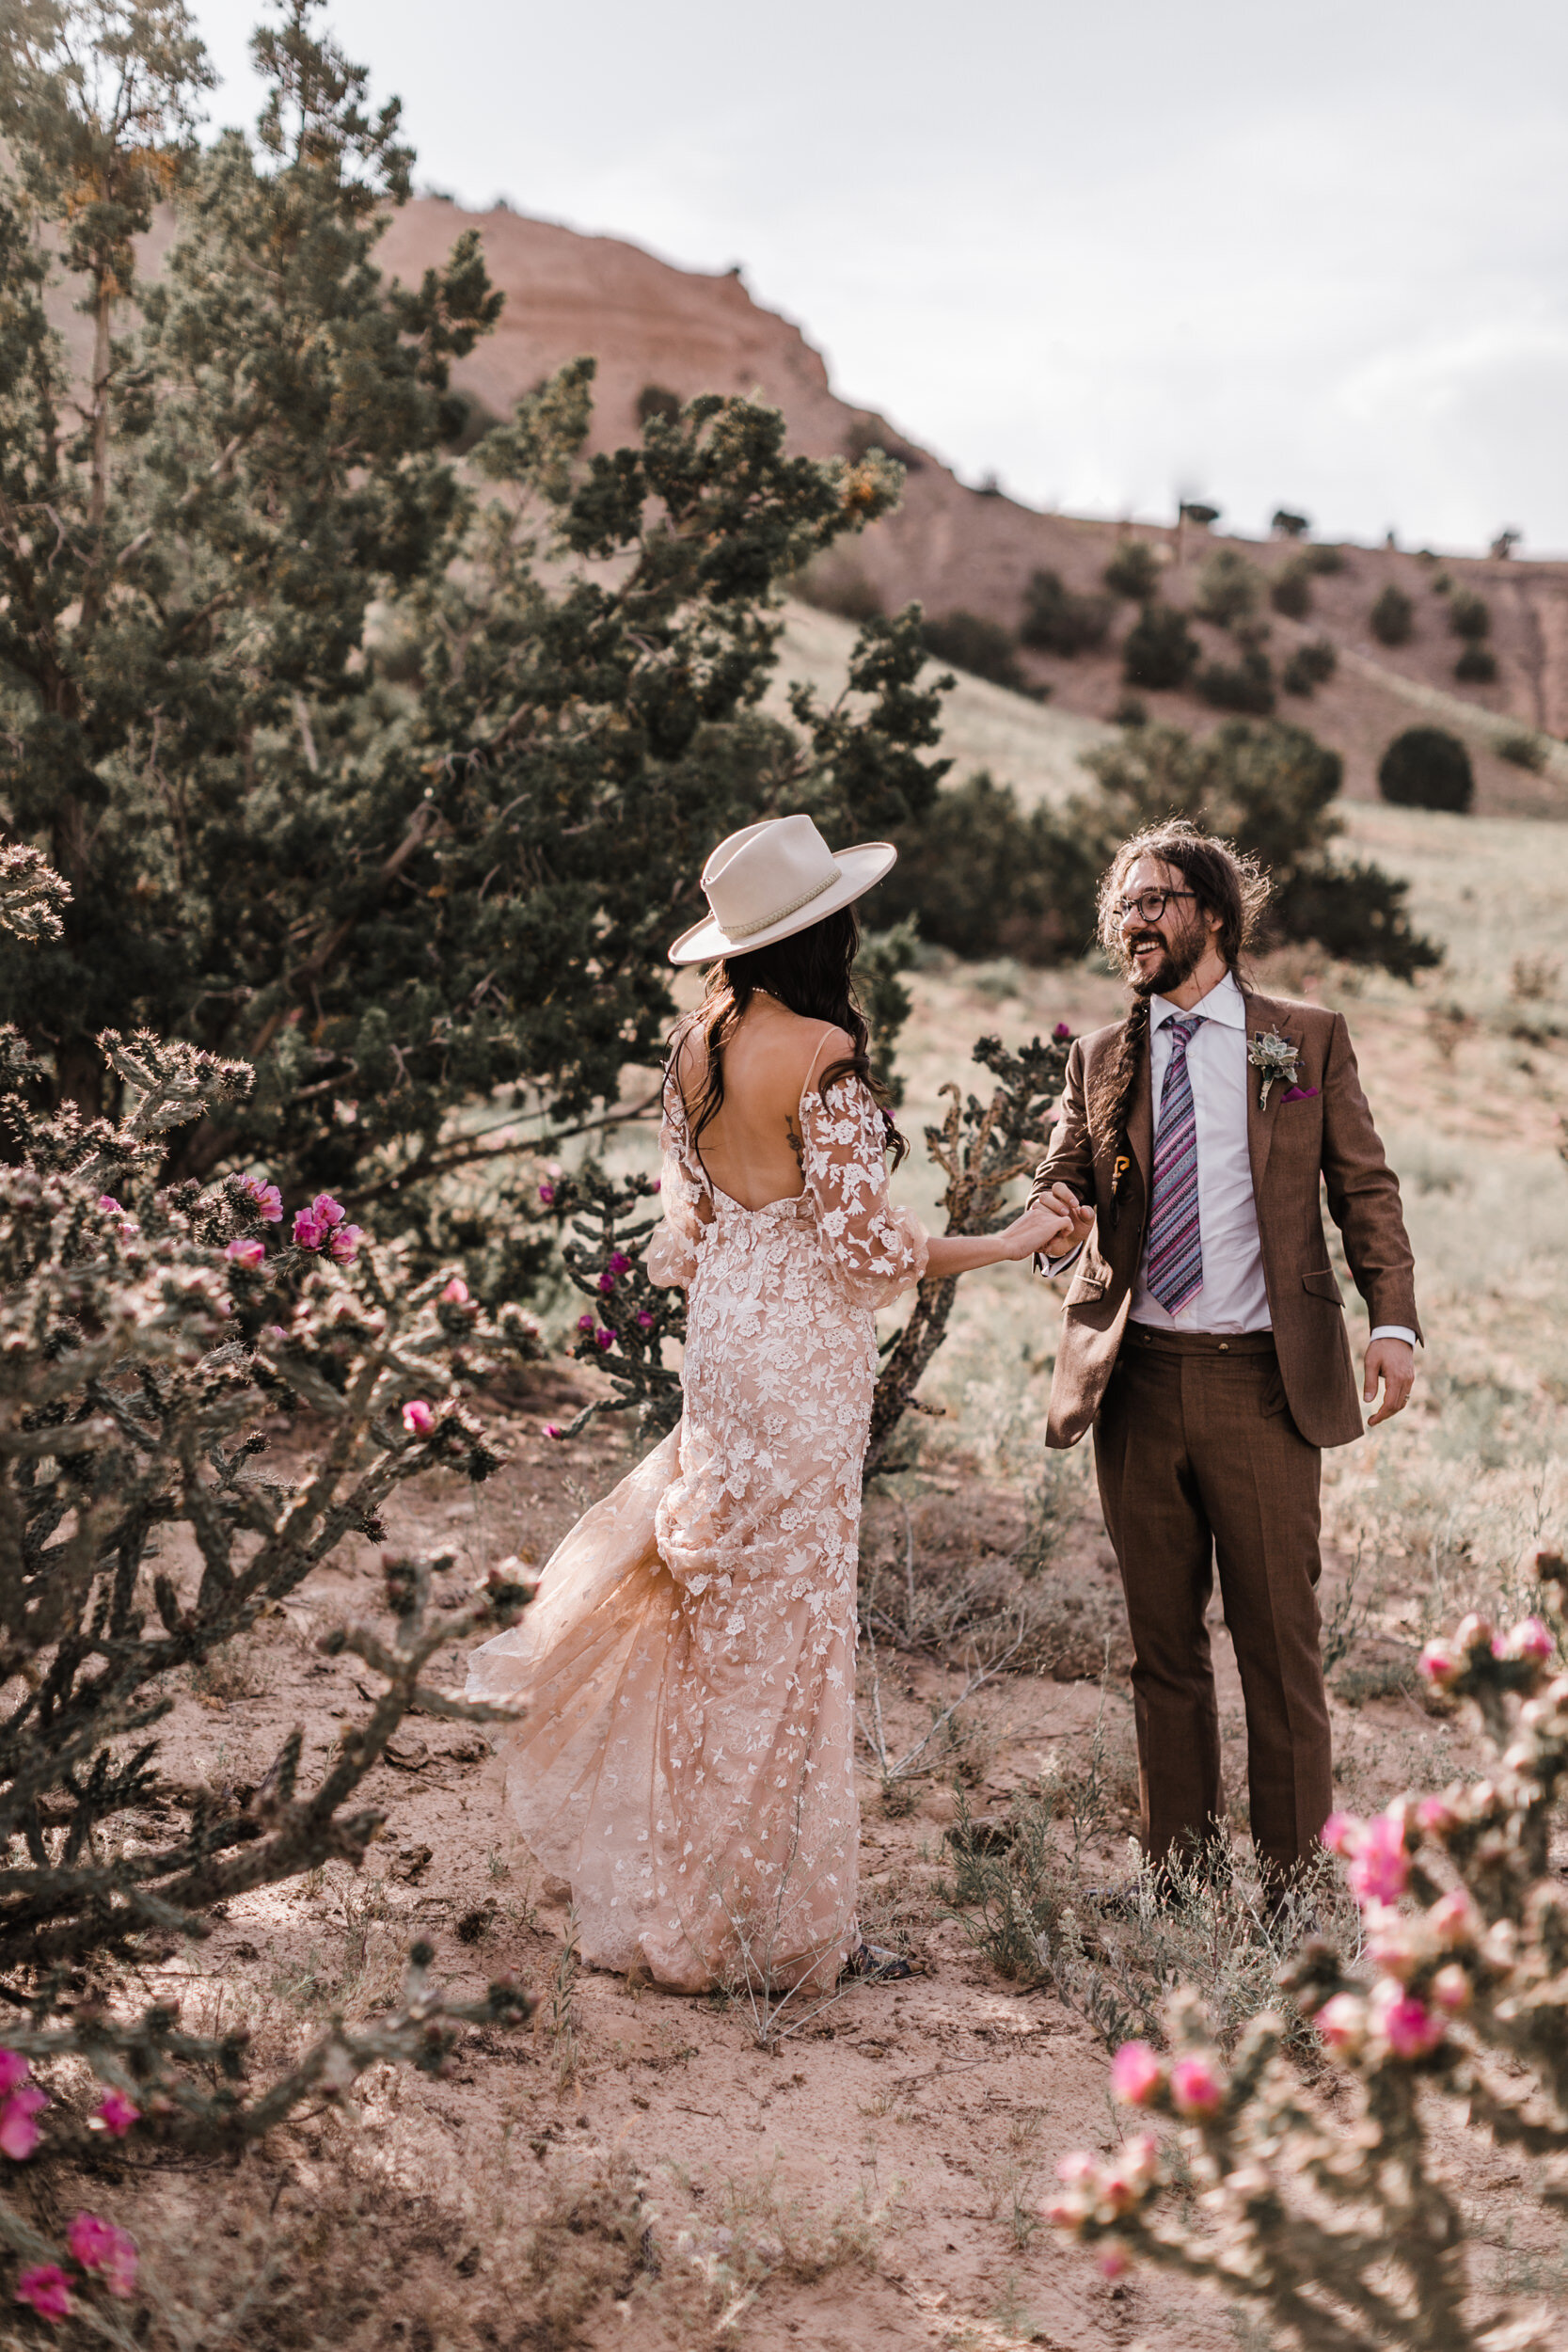 Rachel + Ryan’s Intimate Southwestern Wedding at Inn of the Five Graces in Santa Fe, New Mexico | Turquoise Bride | The Hearnes Adventure Photography